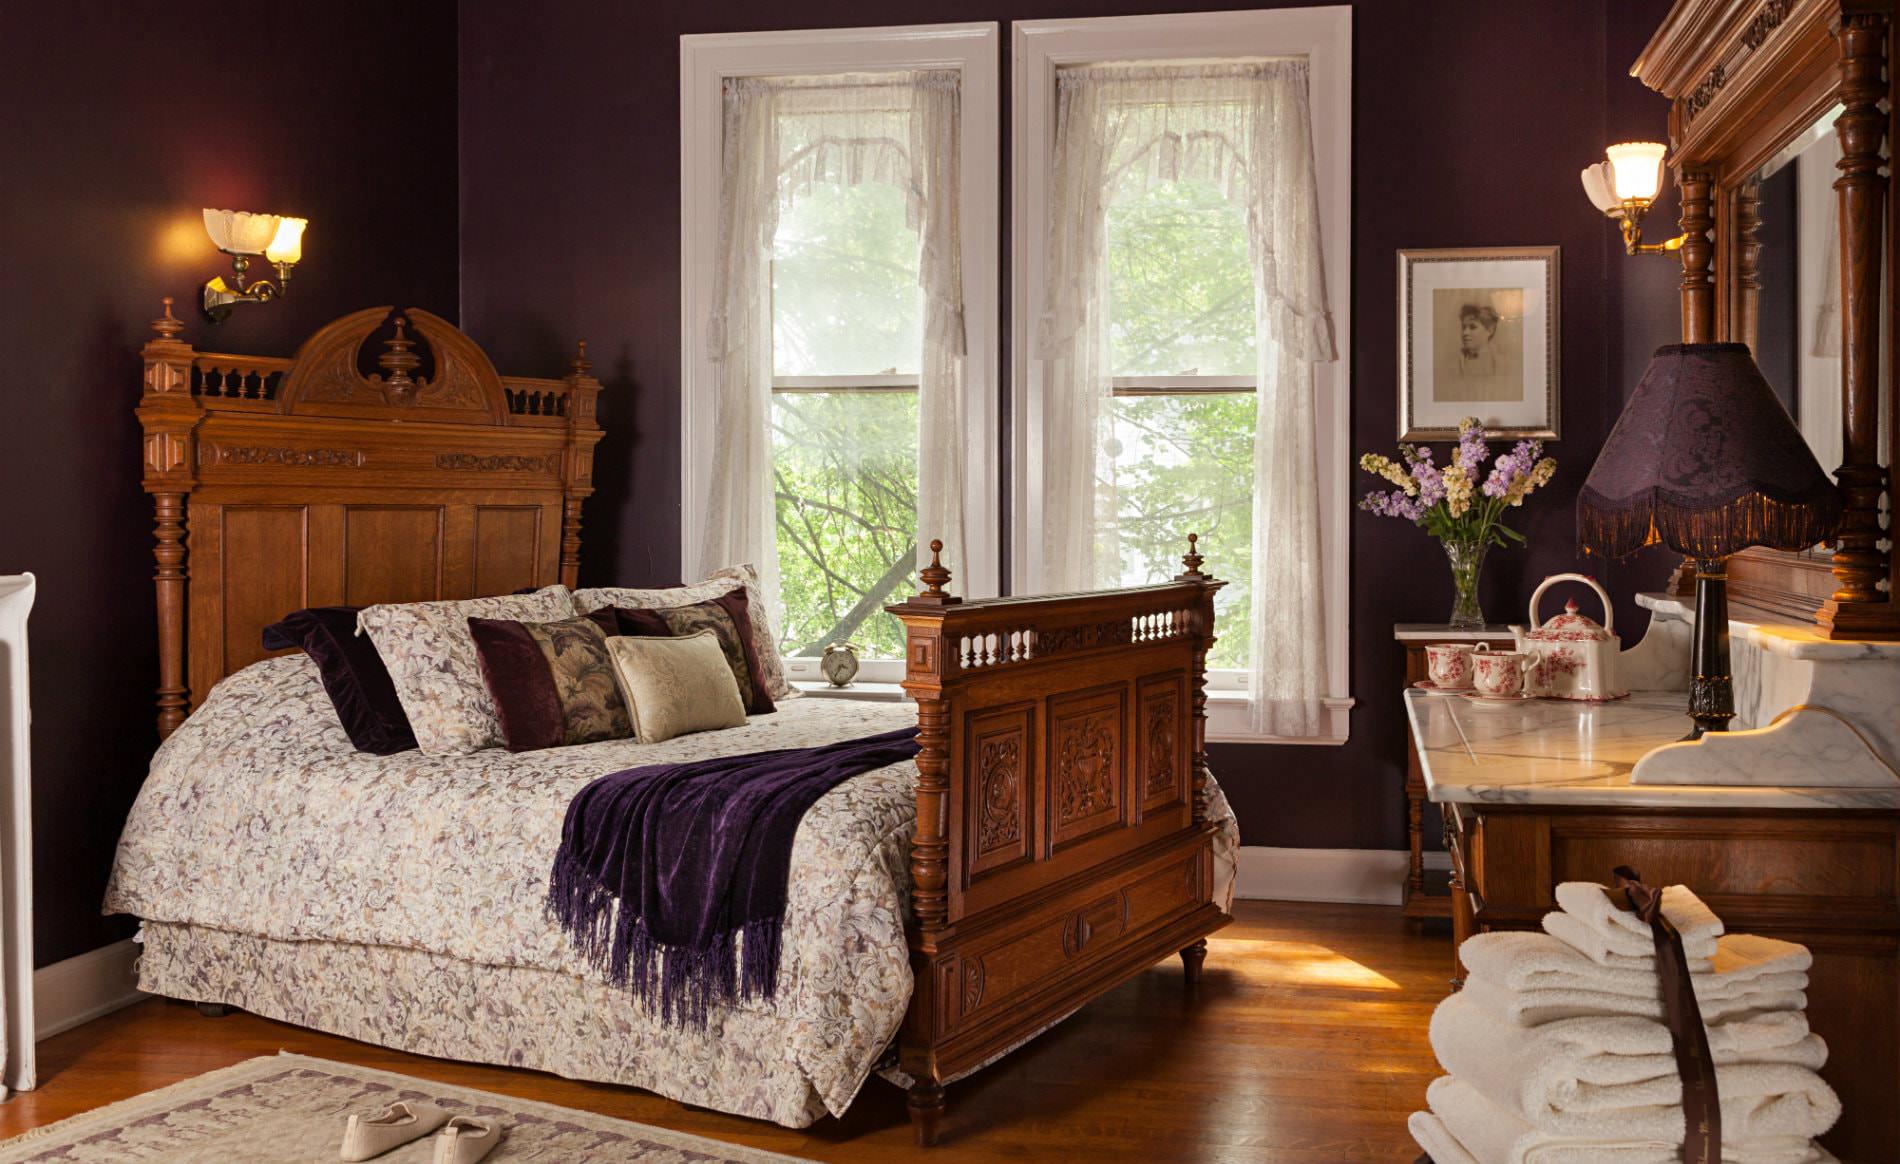 Deep purple room with white trim, white curtains, wood floors, and carved wood bed covered in floral bedding